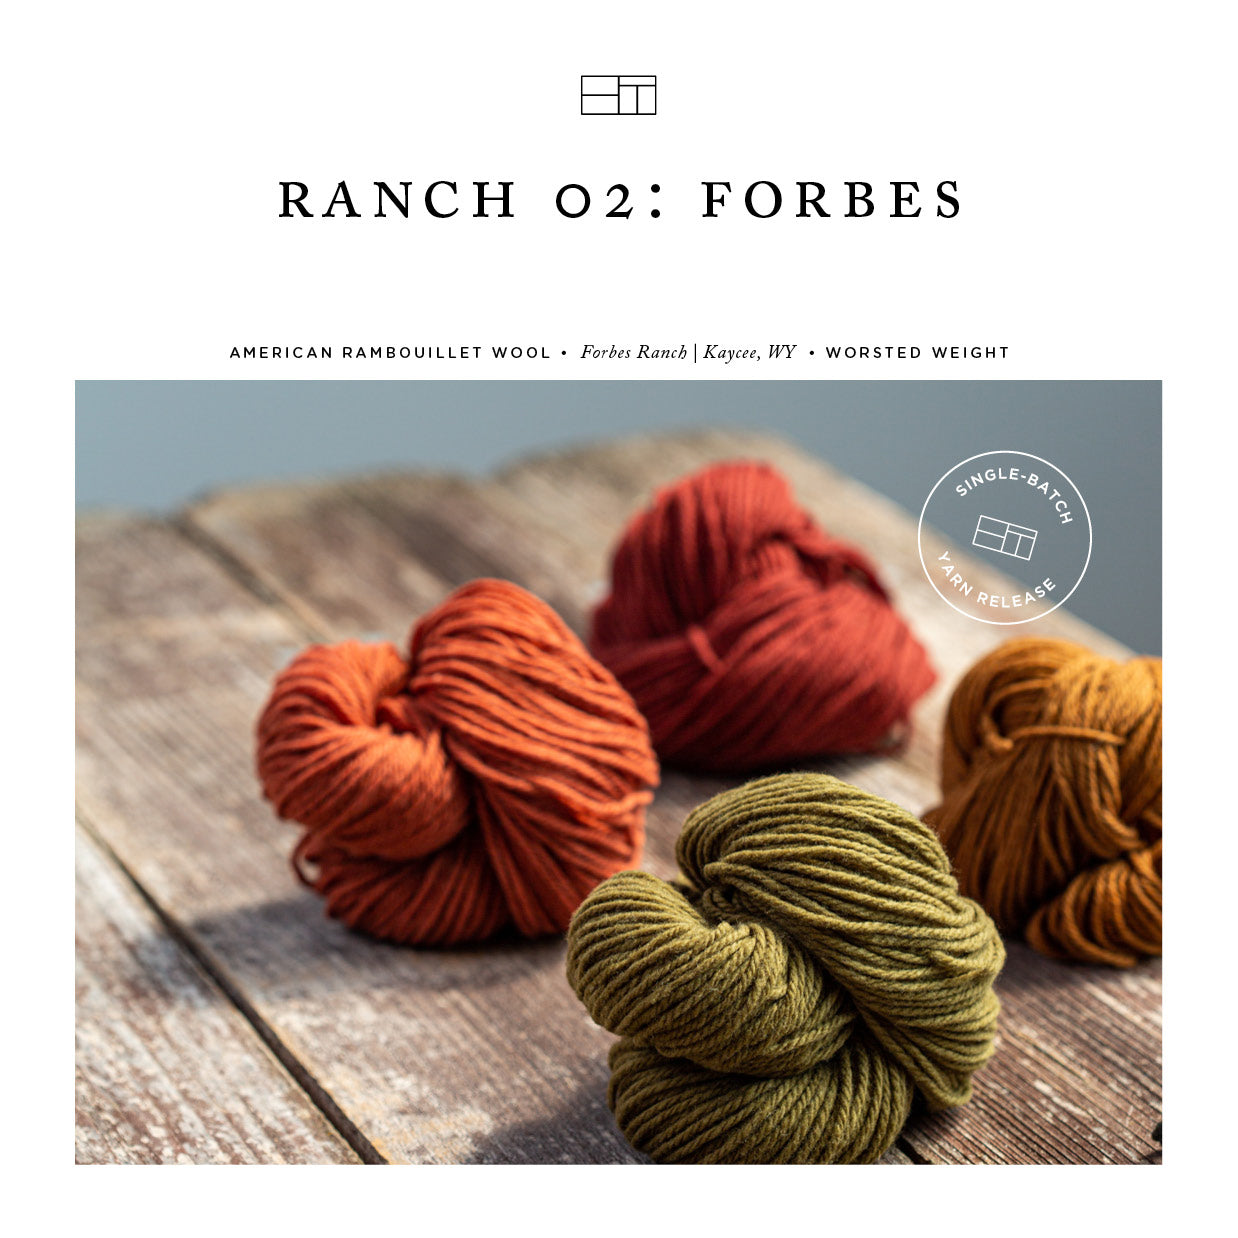 Ranch 02: Forbes